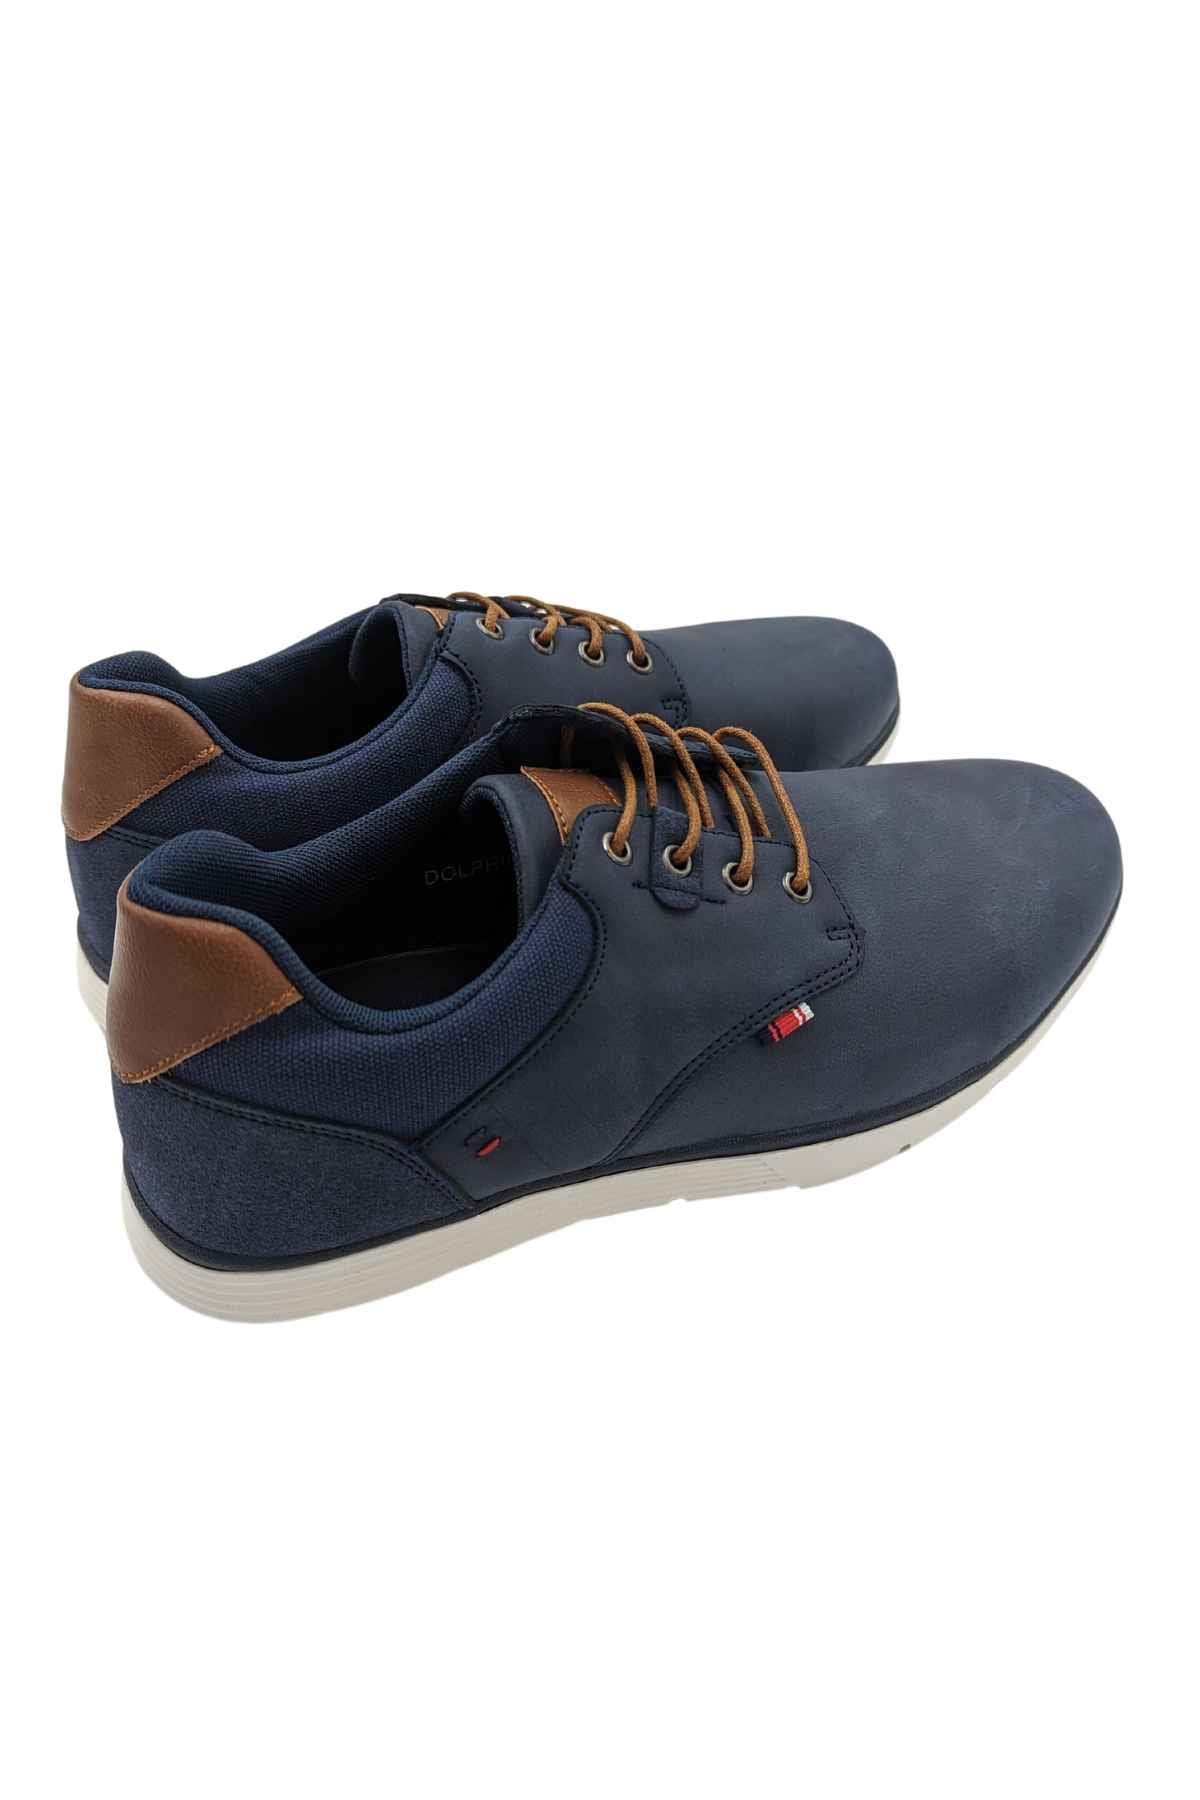 Dolphin Navy Lace Up Shoe-Side view